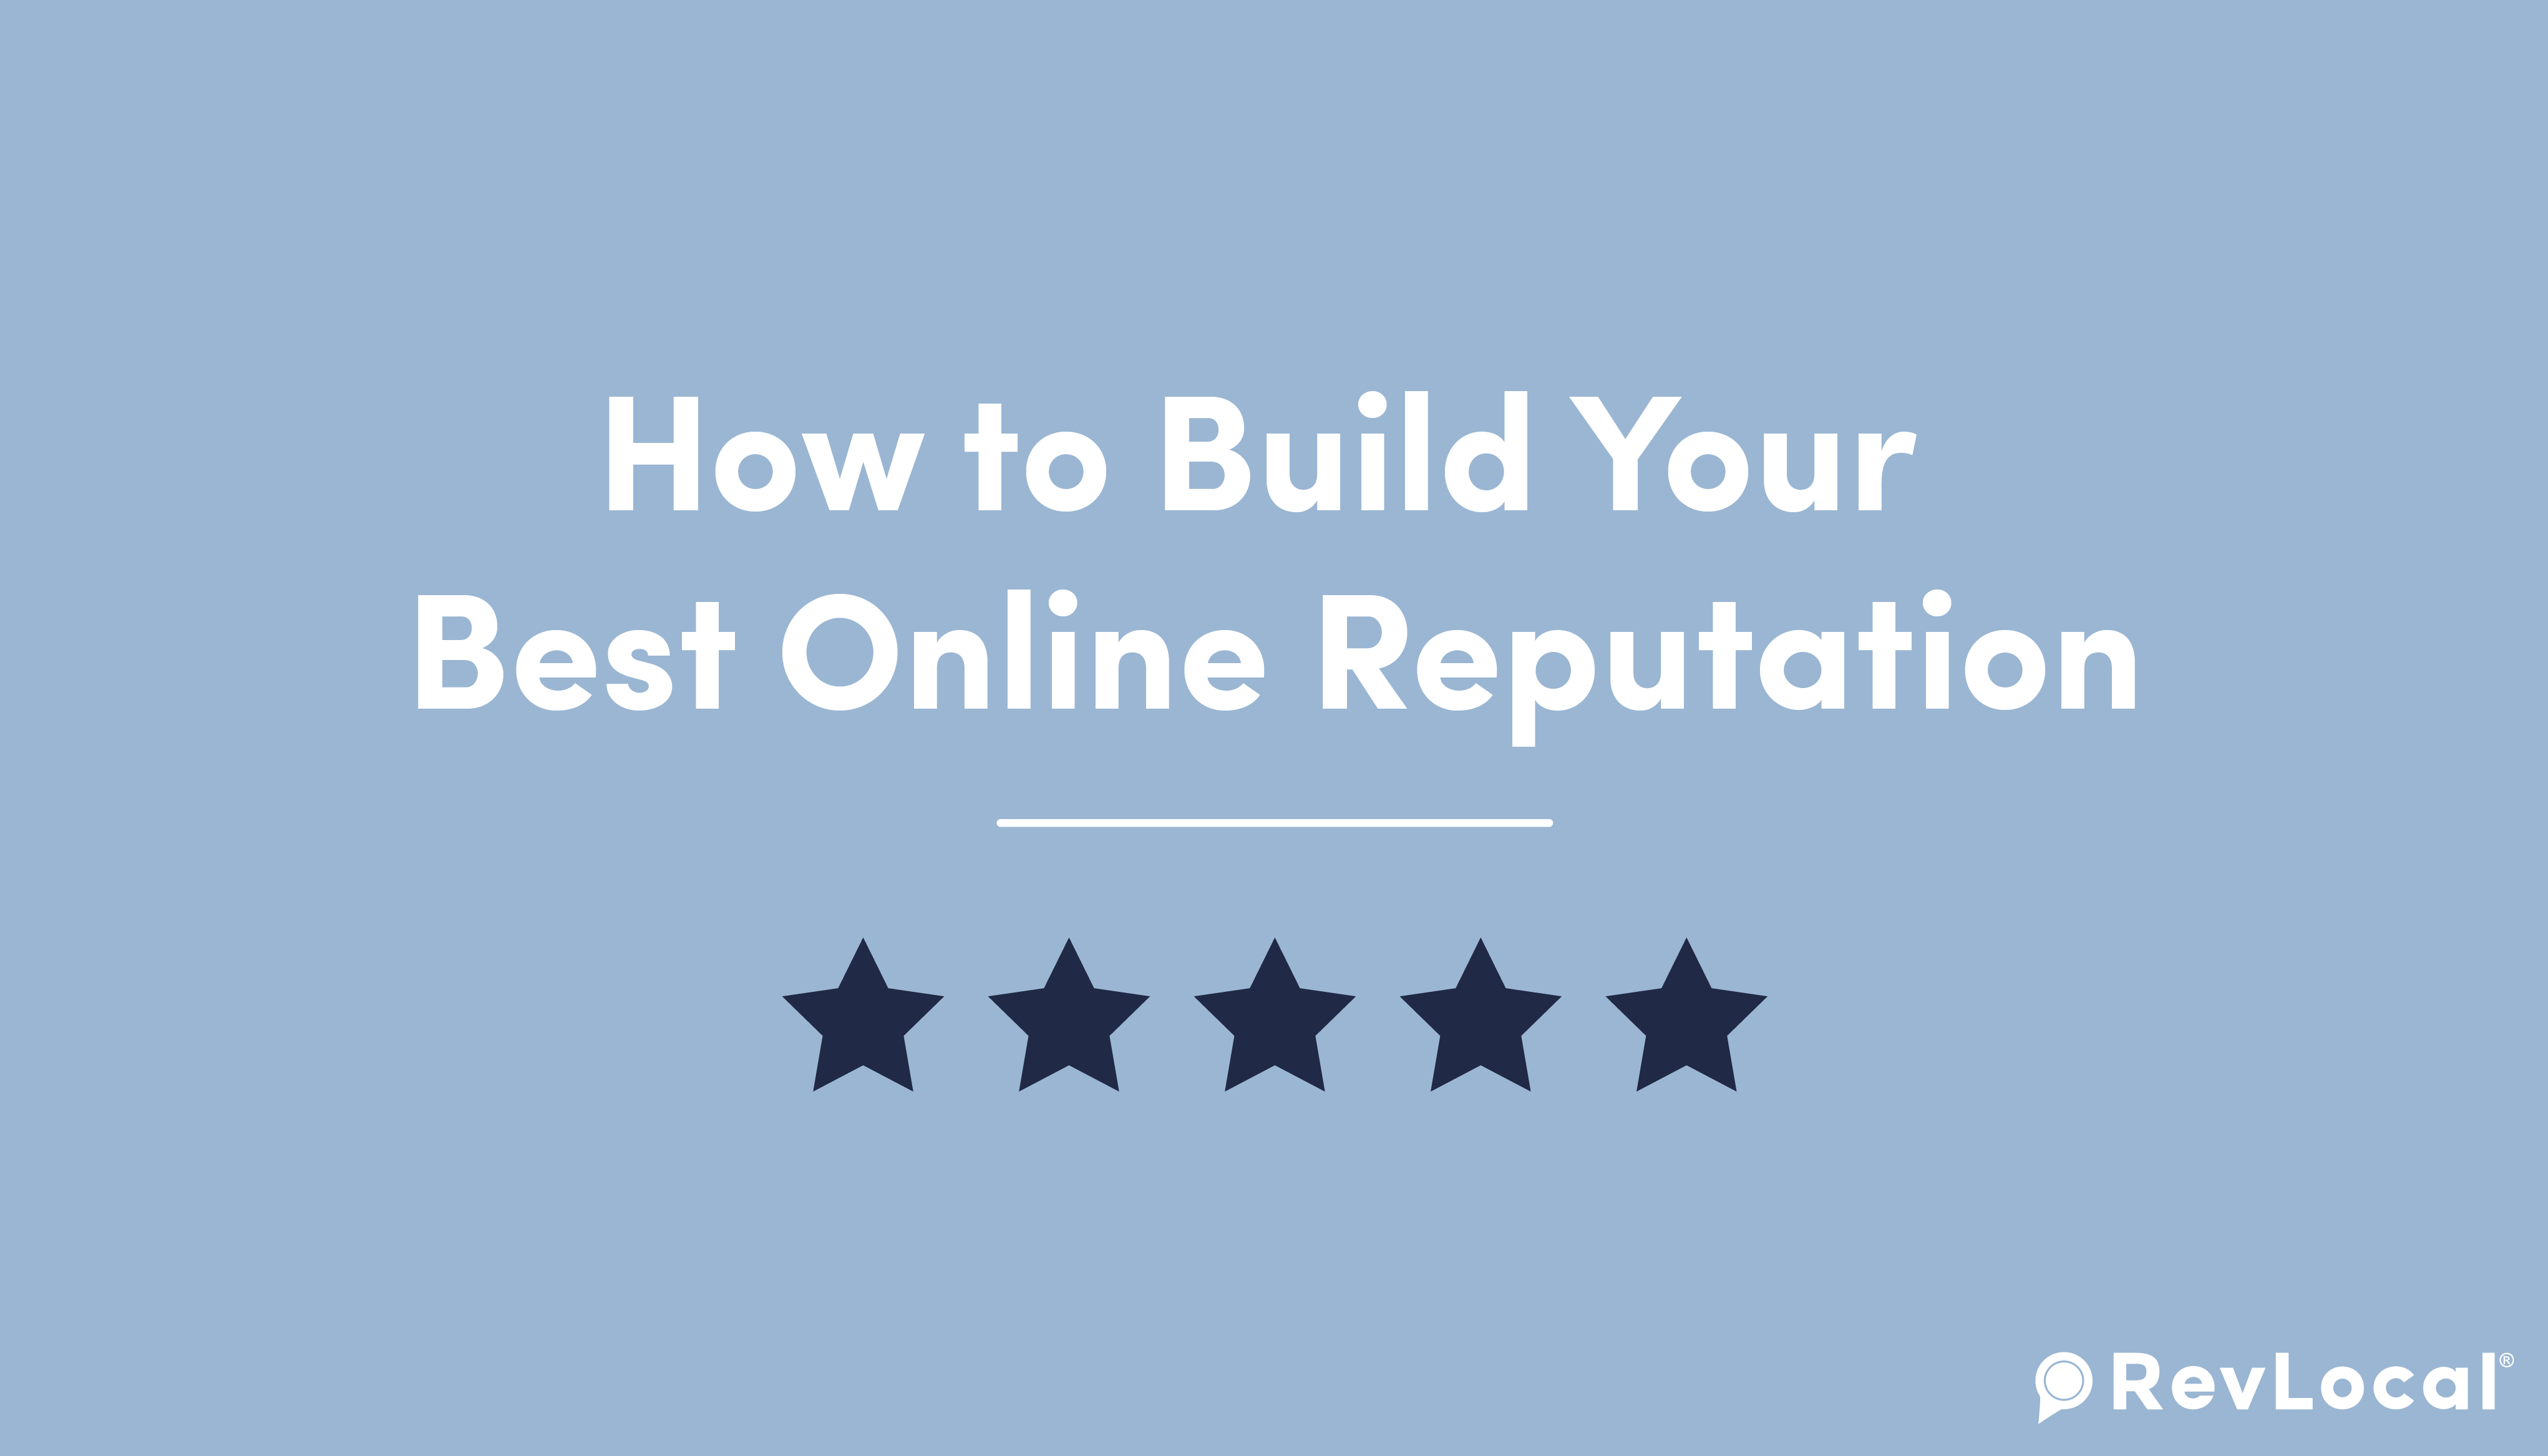 How to build your best online reputation